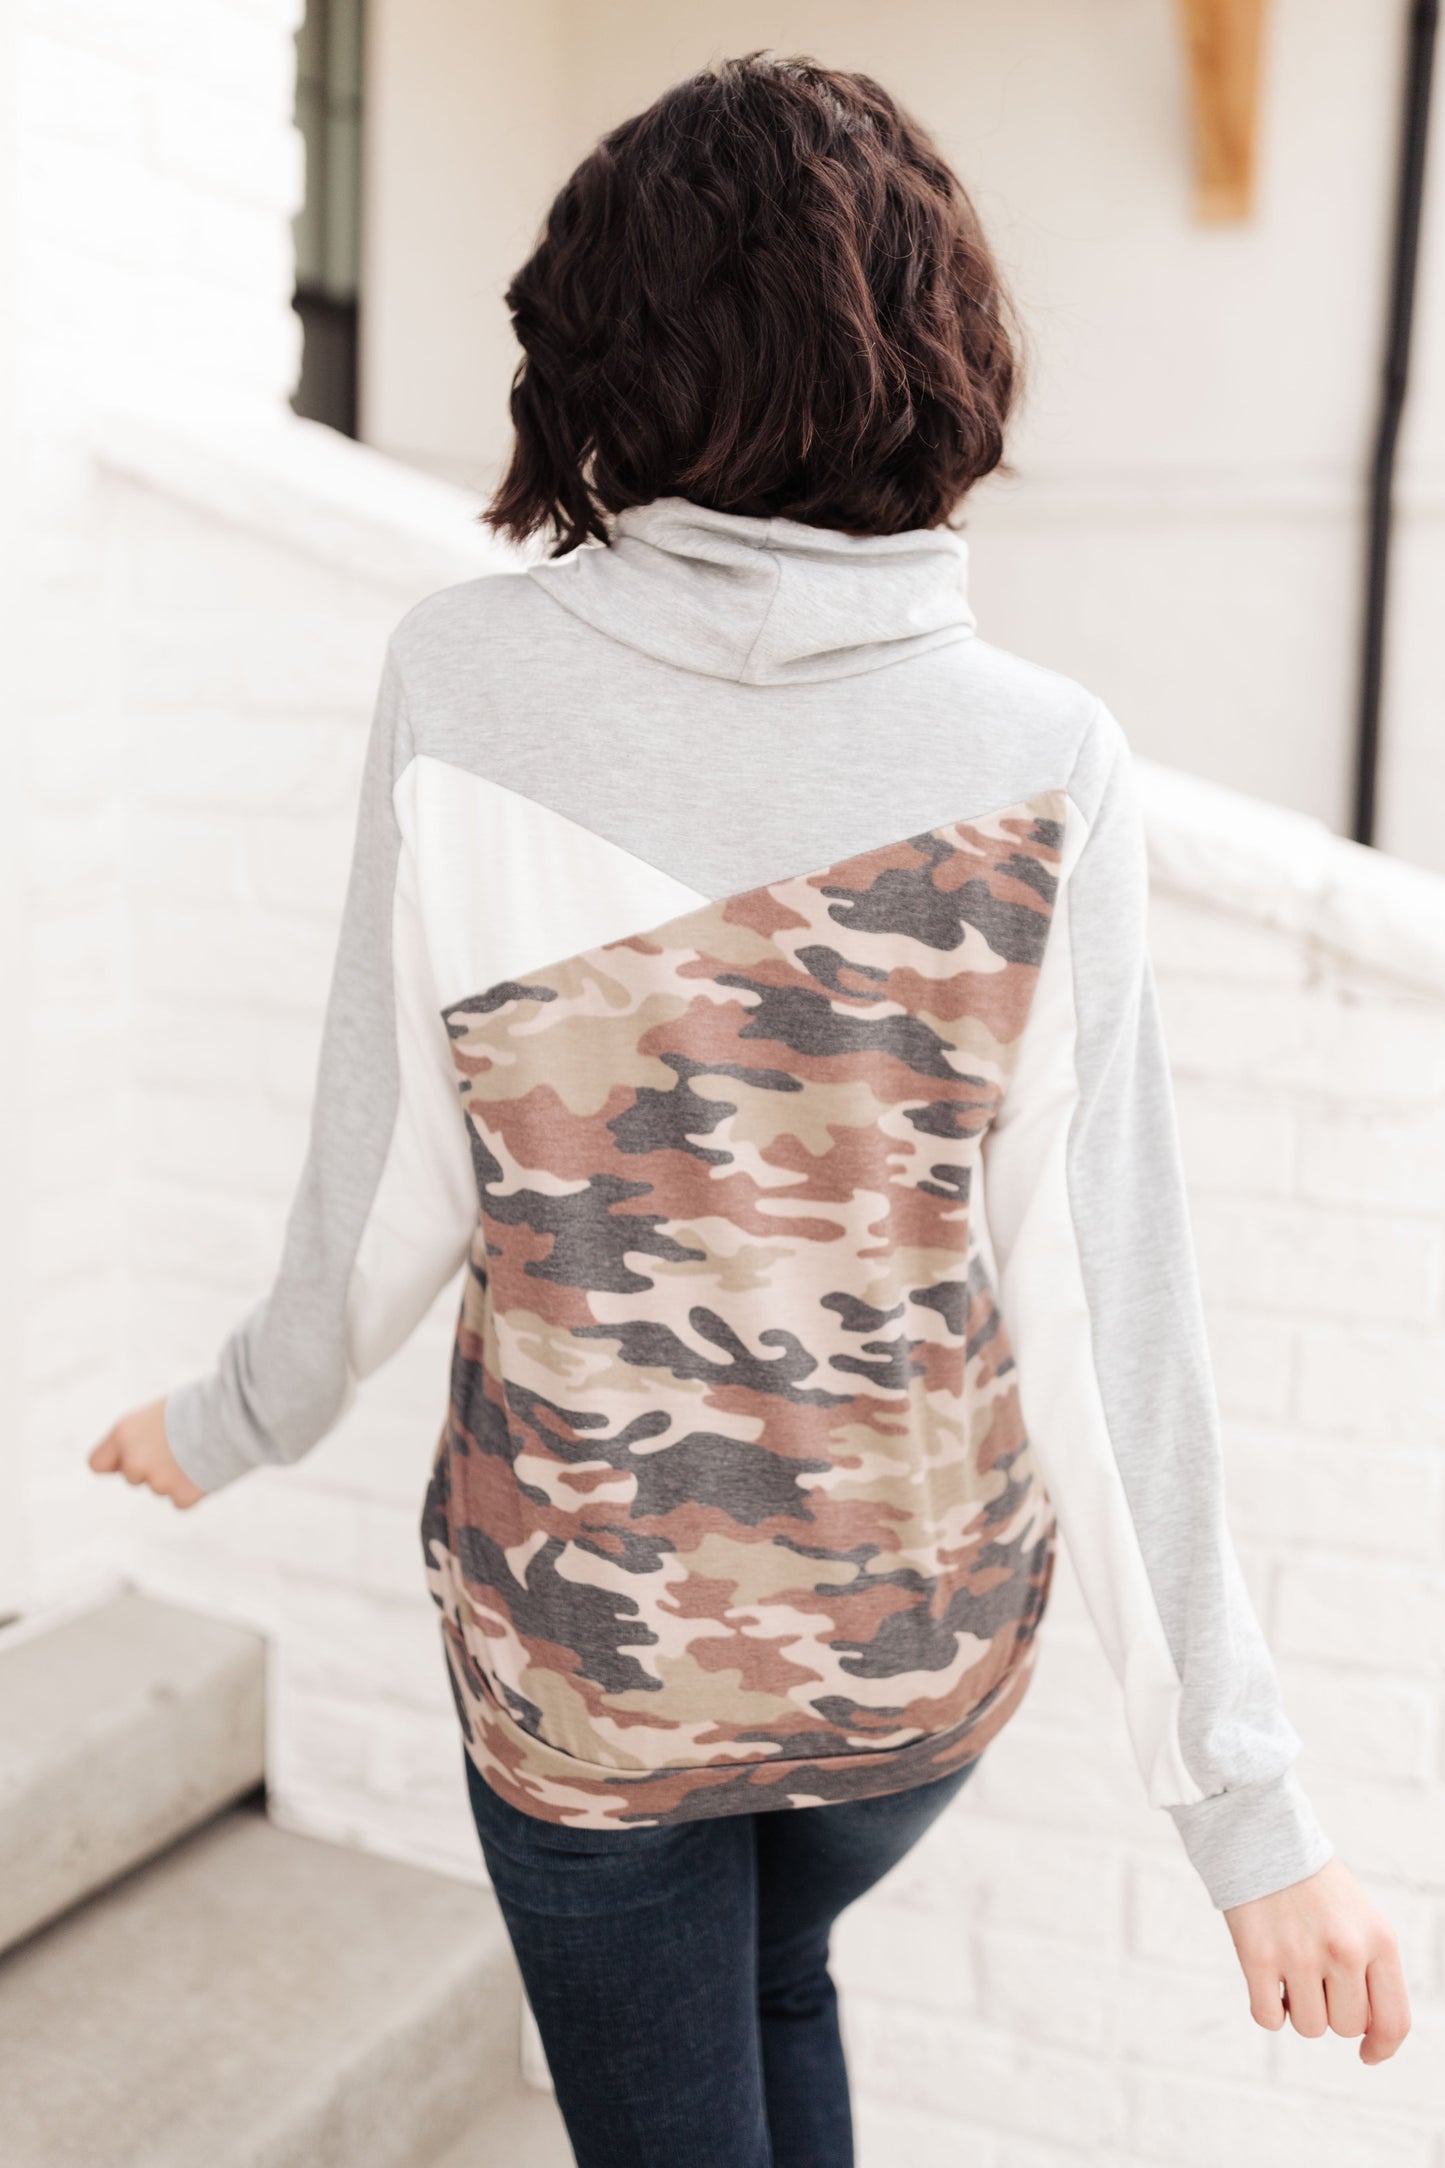 All About Adventure Top in Camo (Online Exclusive)